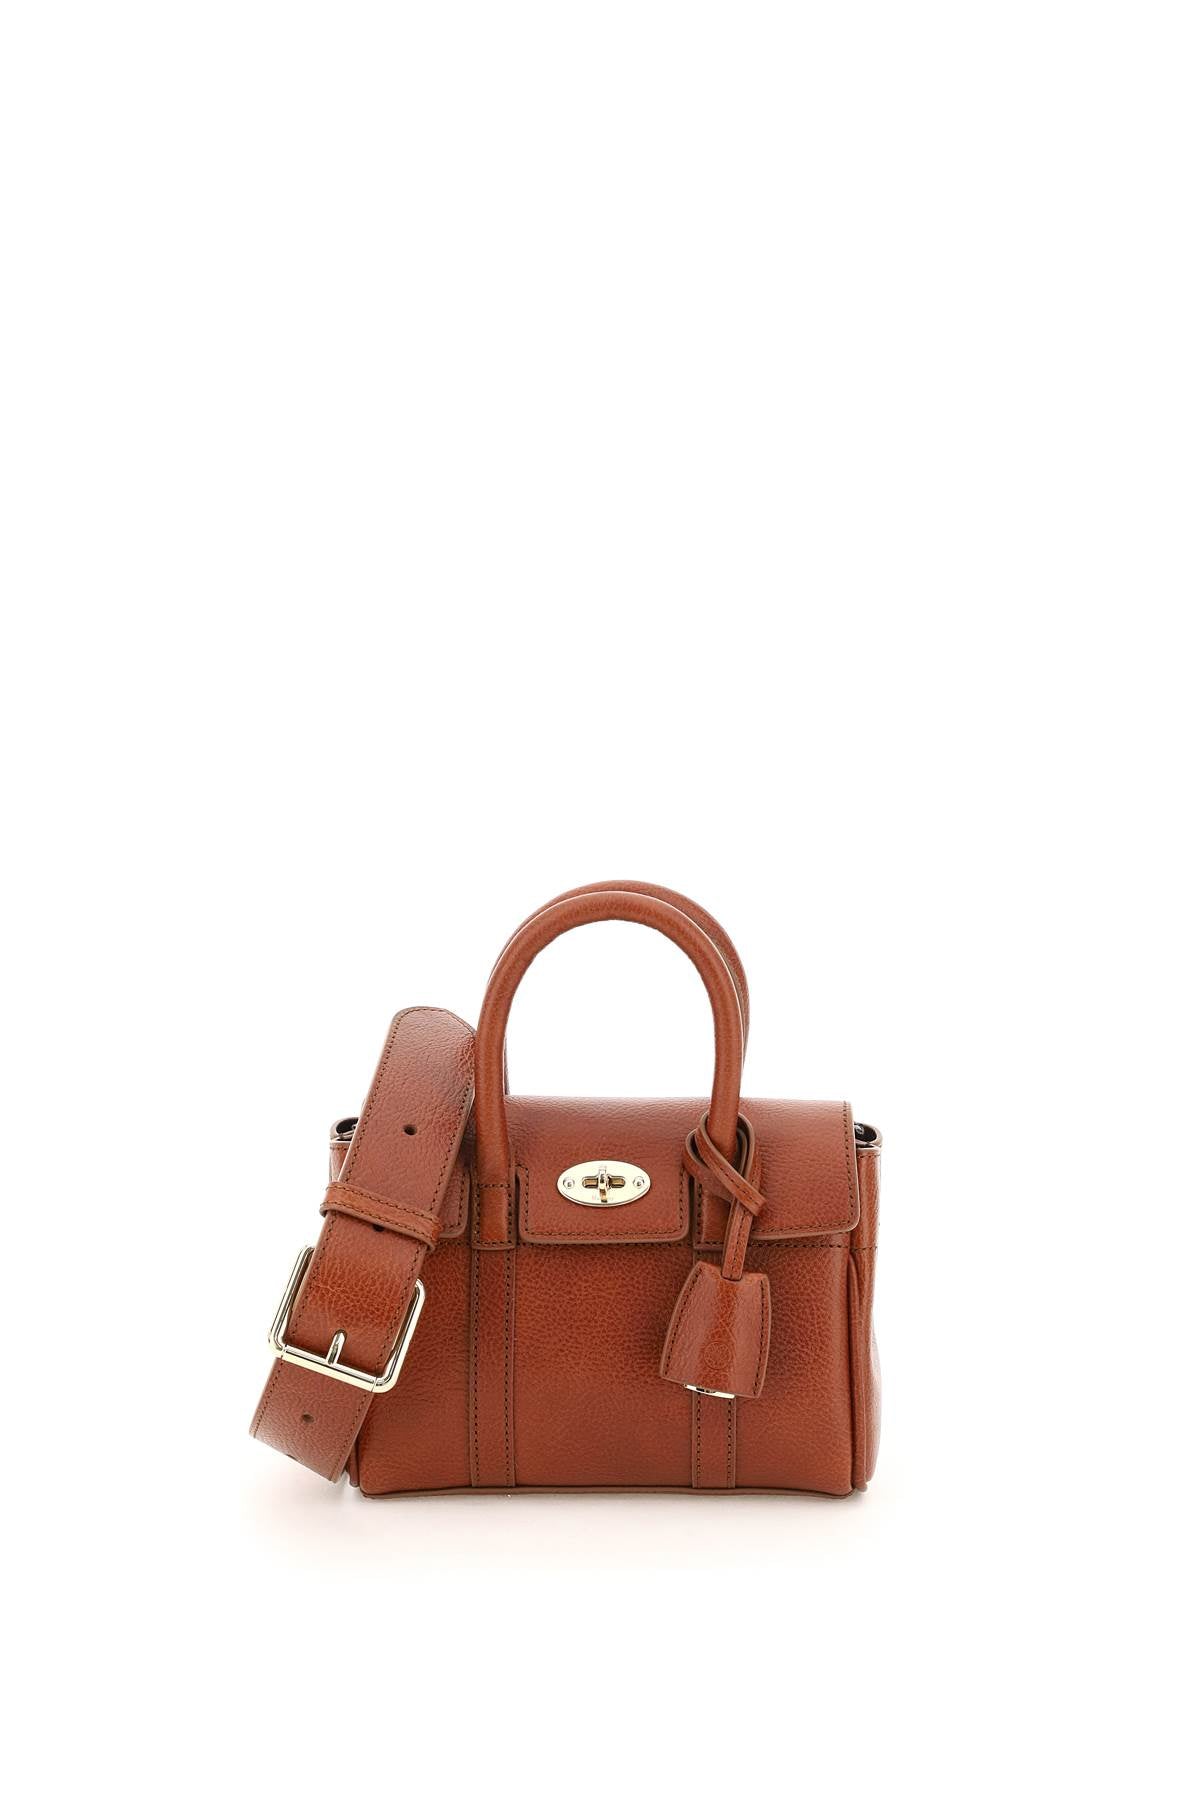 Shop Mulberry Chic Mini Bayswater Handbag In Brown Grained Leather With Iconic Lock Closure